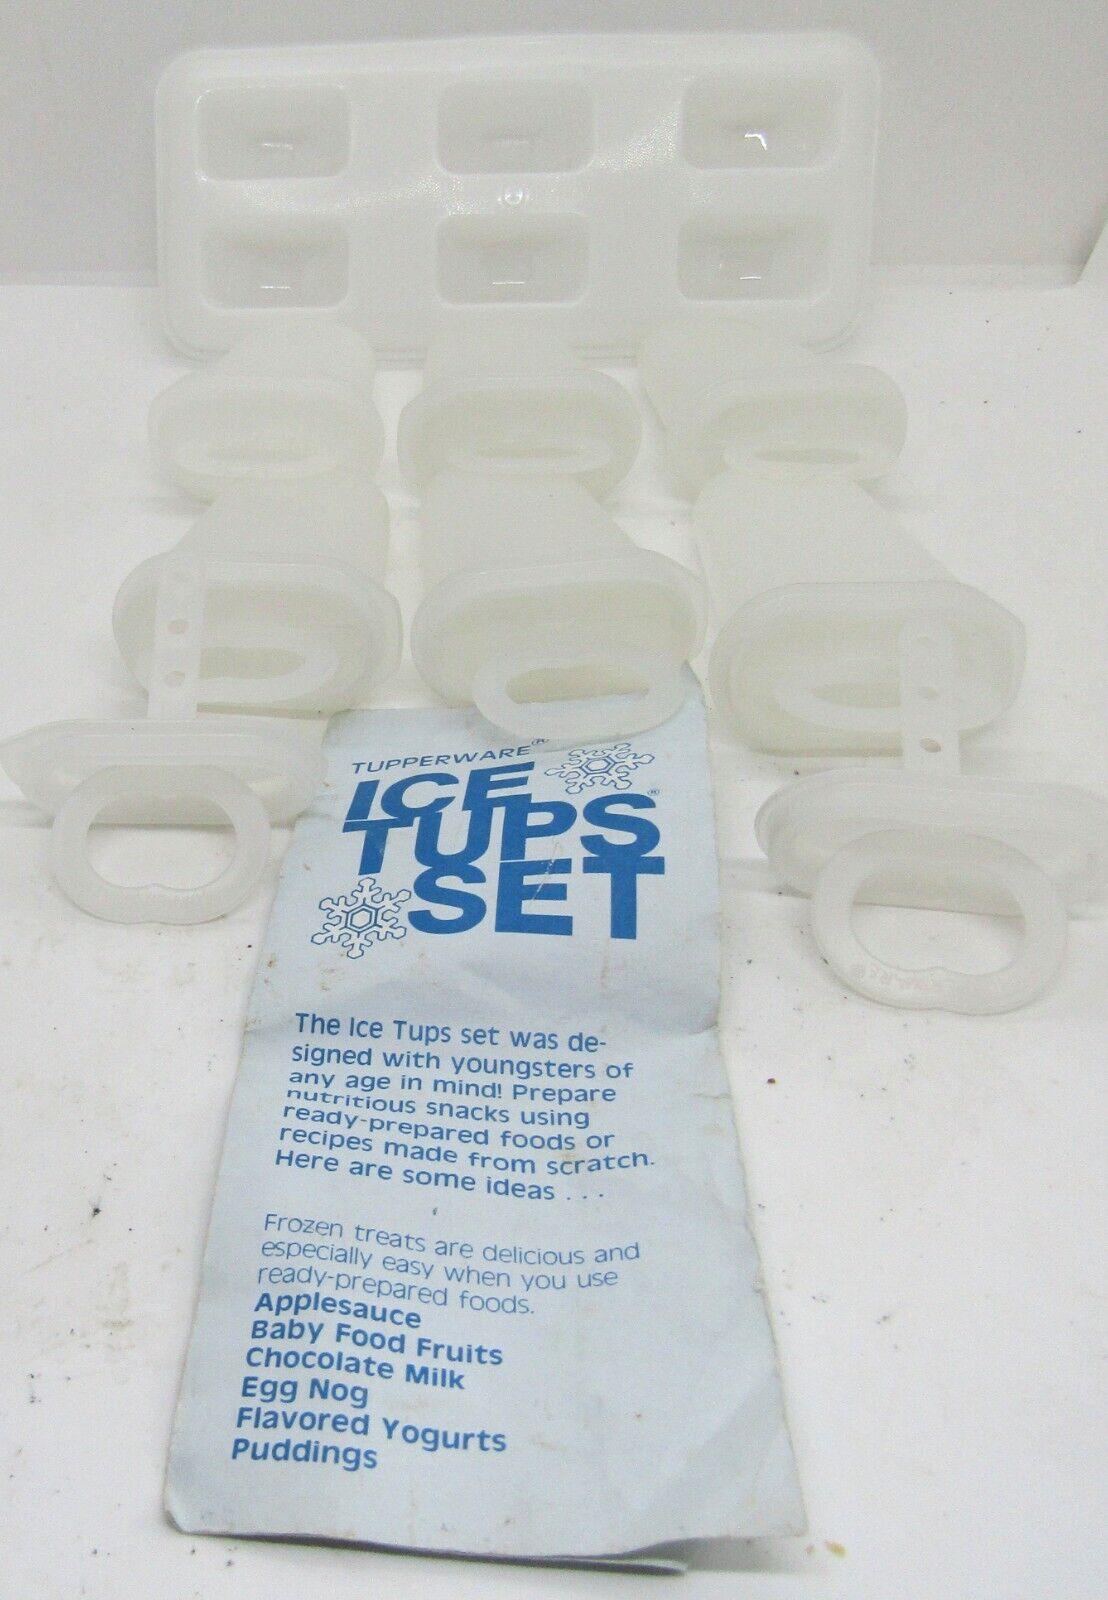 VINTAGE Tupperware Ice Tups Popsicle Maker Set 6 Molds (2 oz) 8 Inserts and tray